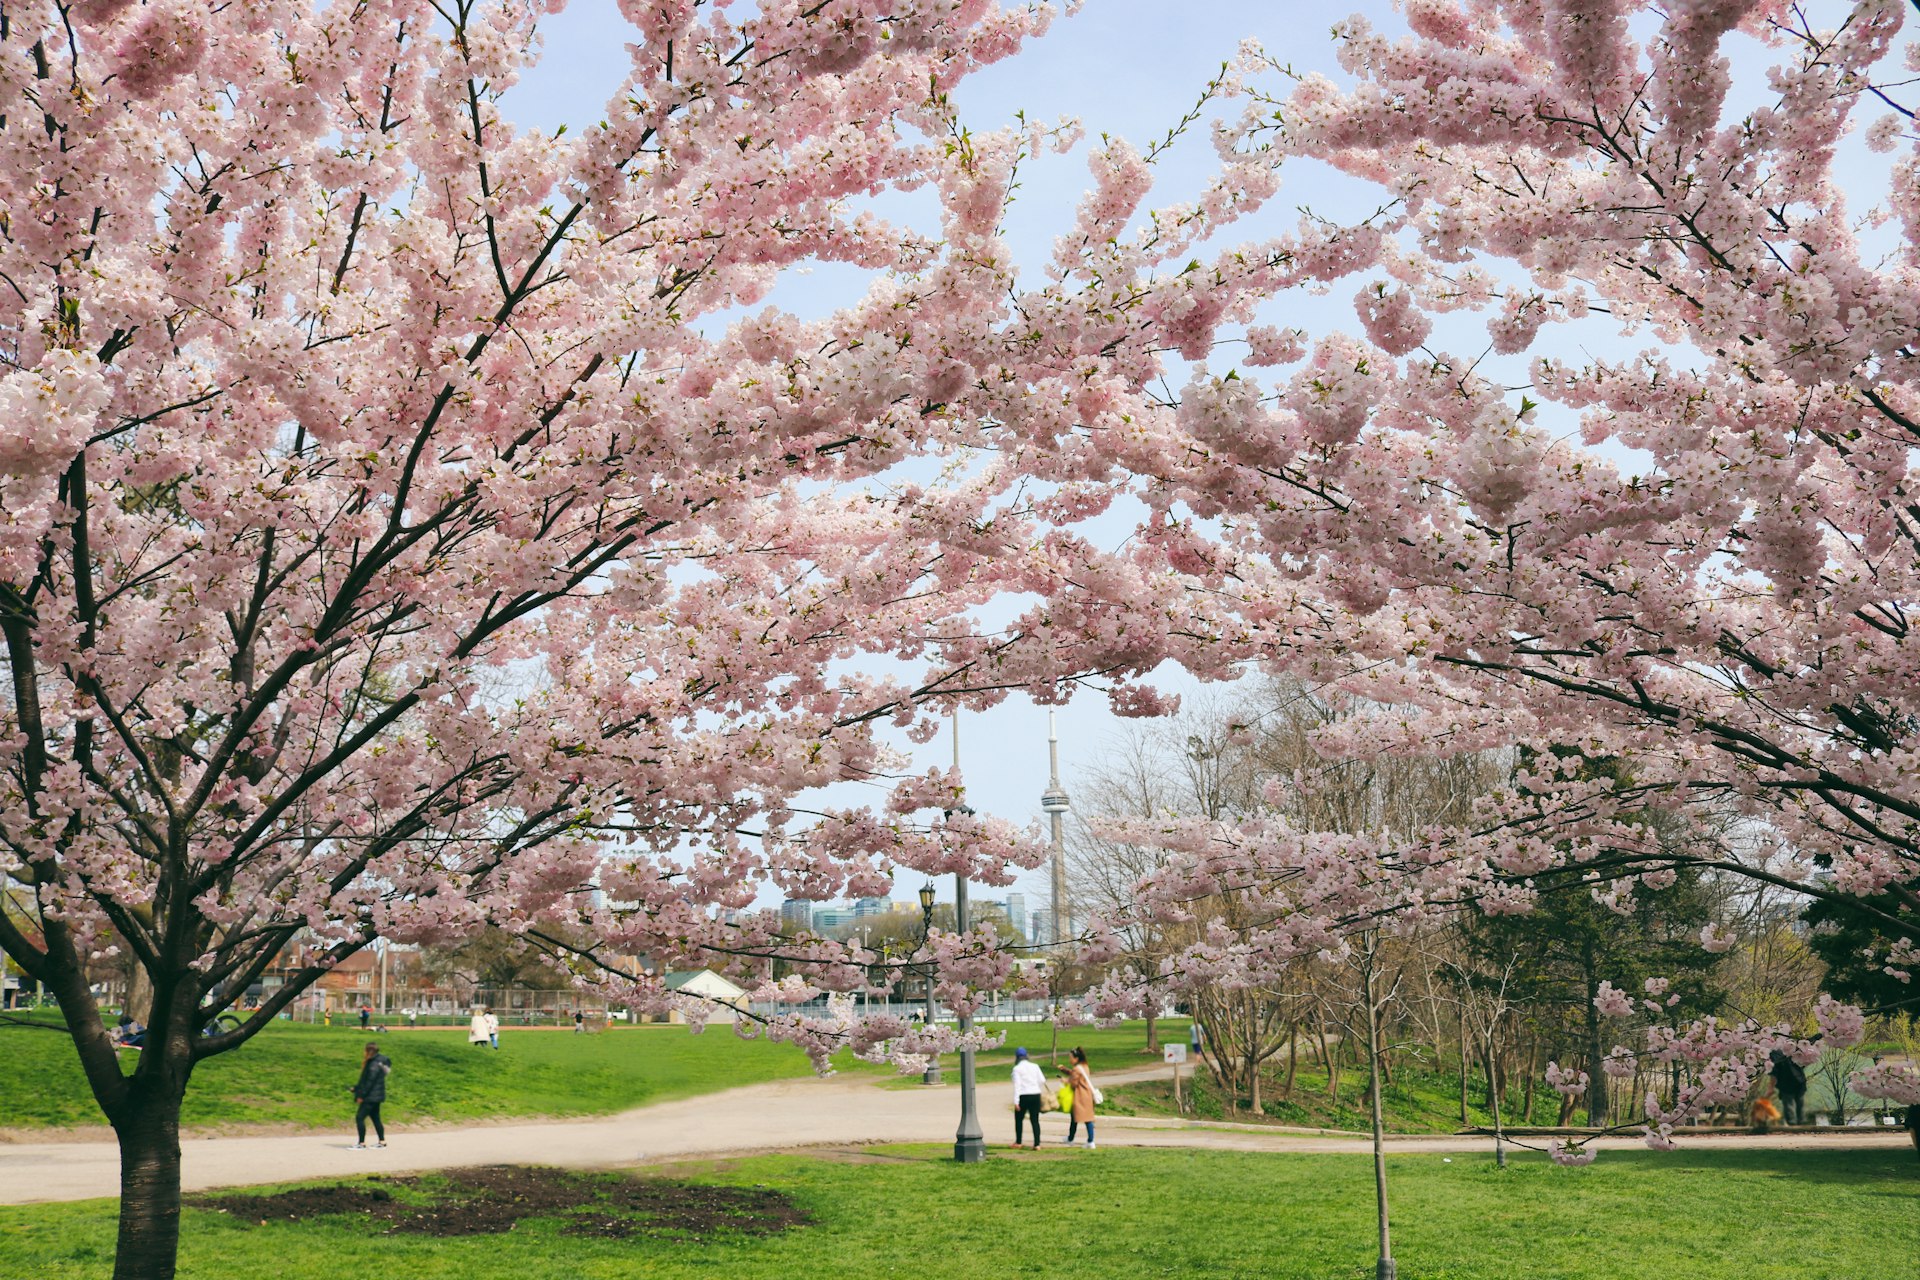 People walk under blossoming cherry trees with the tall CN Tower visible in the distance, Trinity-Bellwood Park, Toronto, Ontario, Canada